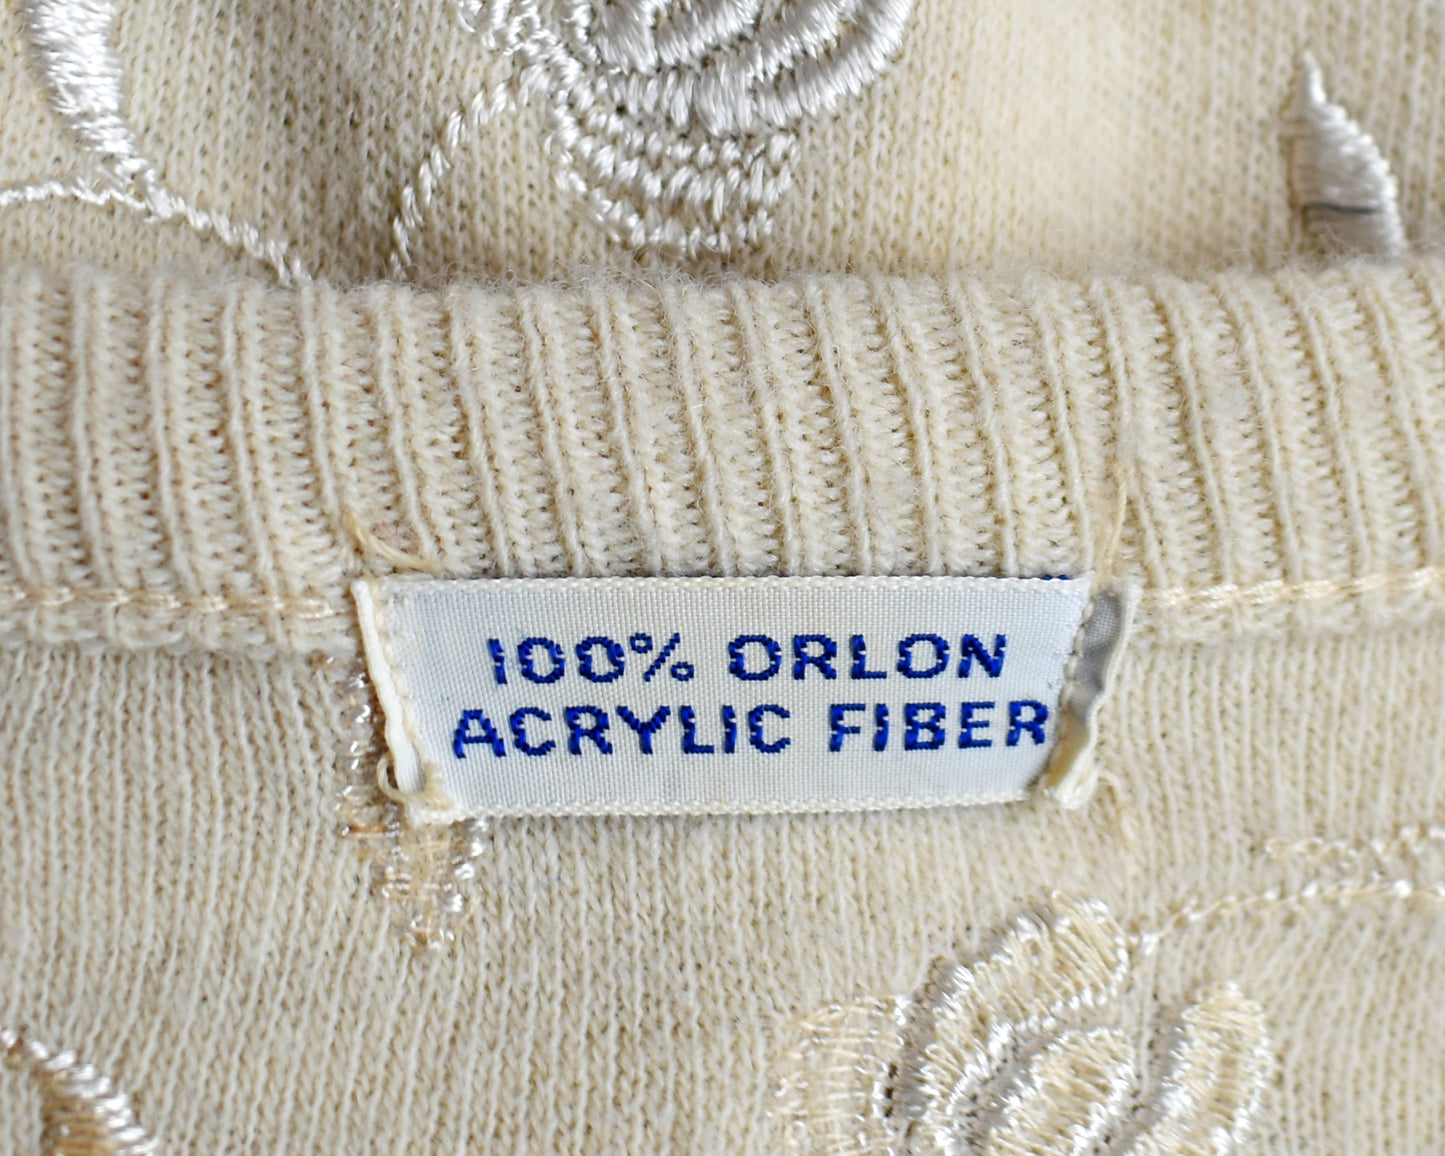 close up of the tag which says 100% orlon acrylic fiber